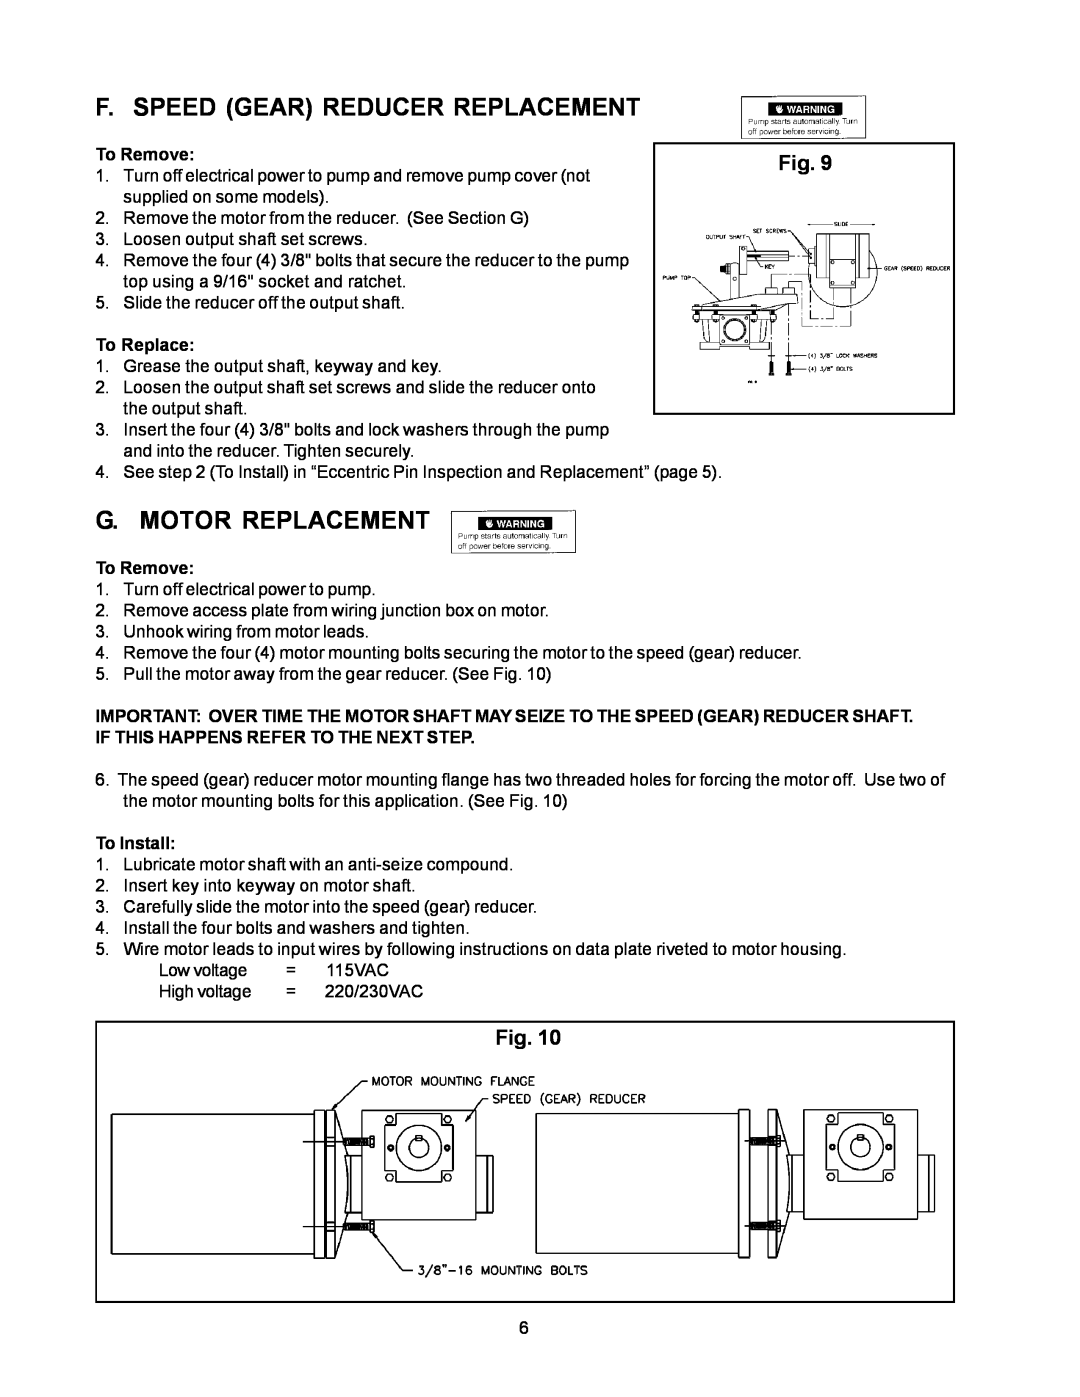 SeaLand Vacuum Pump owner manual F. Speed Gear Reducer Replacement, G. Motor Replacement, To Remove, To Replace, To Install 